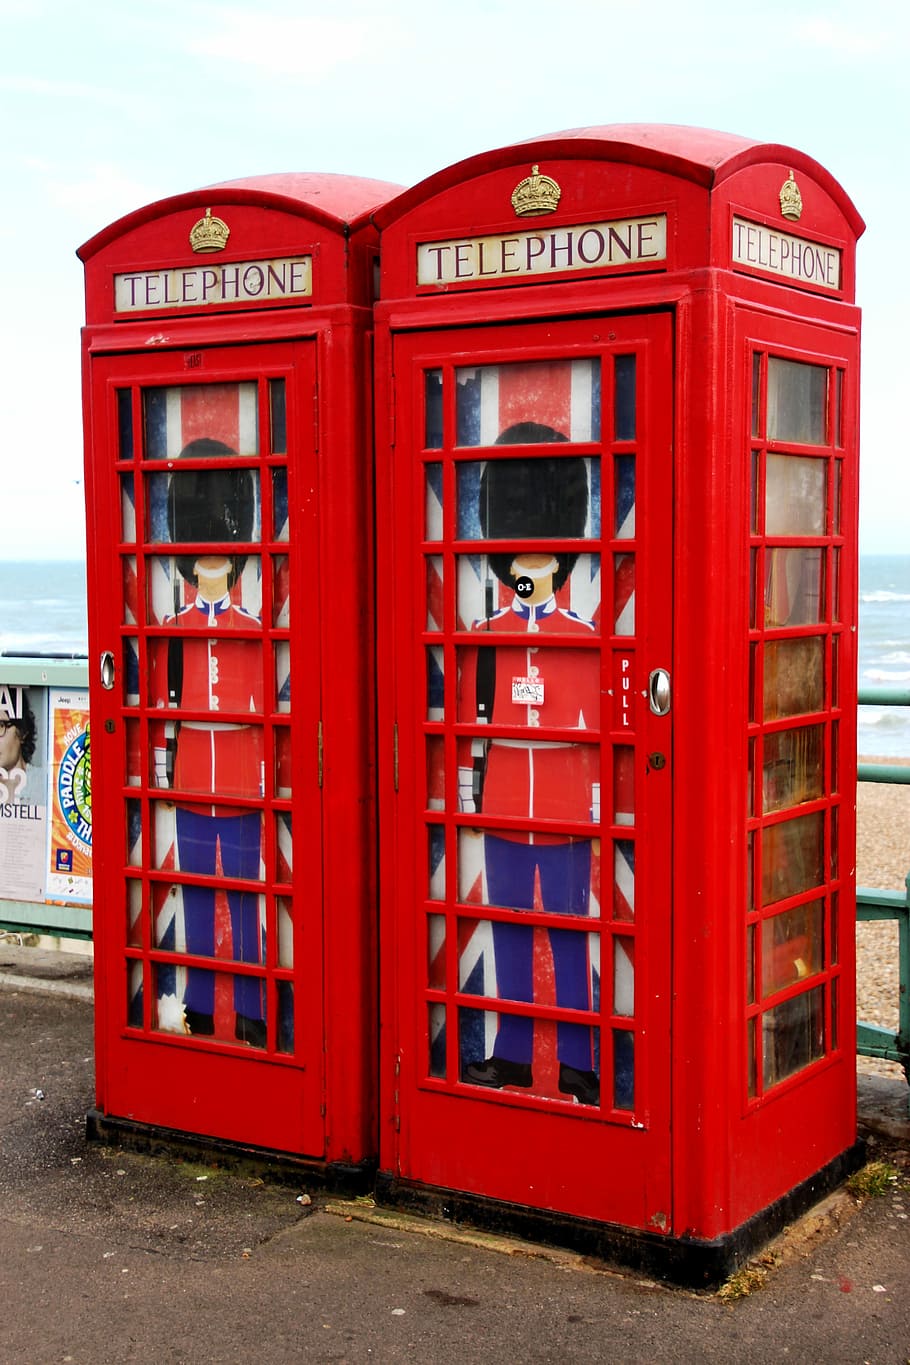 Telephone Boxes, English, England, red, uk, british, old, booth